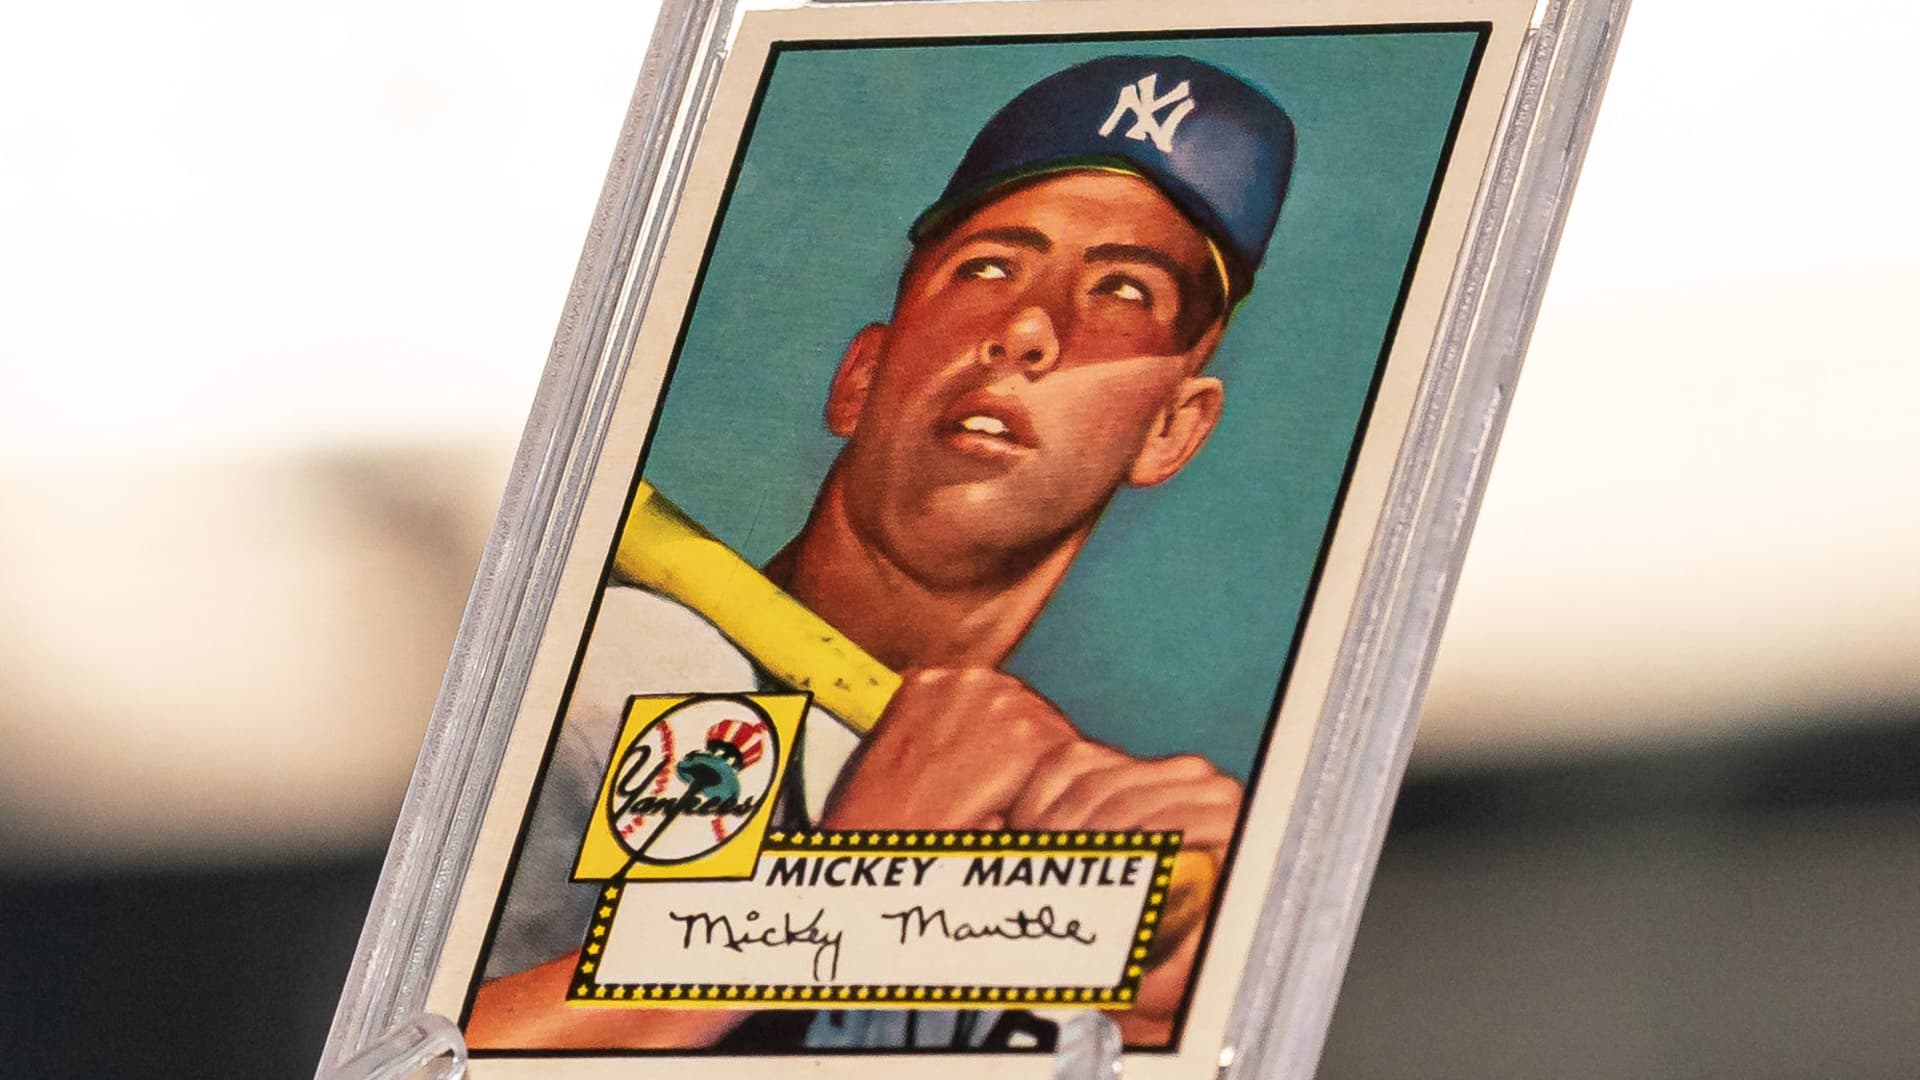 The 1952 Topps Mickey Mantle rookie card from the collection of Marshall Fogel arrives at McGregor Square's Rally Hotel.